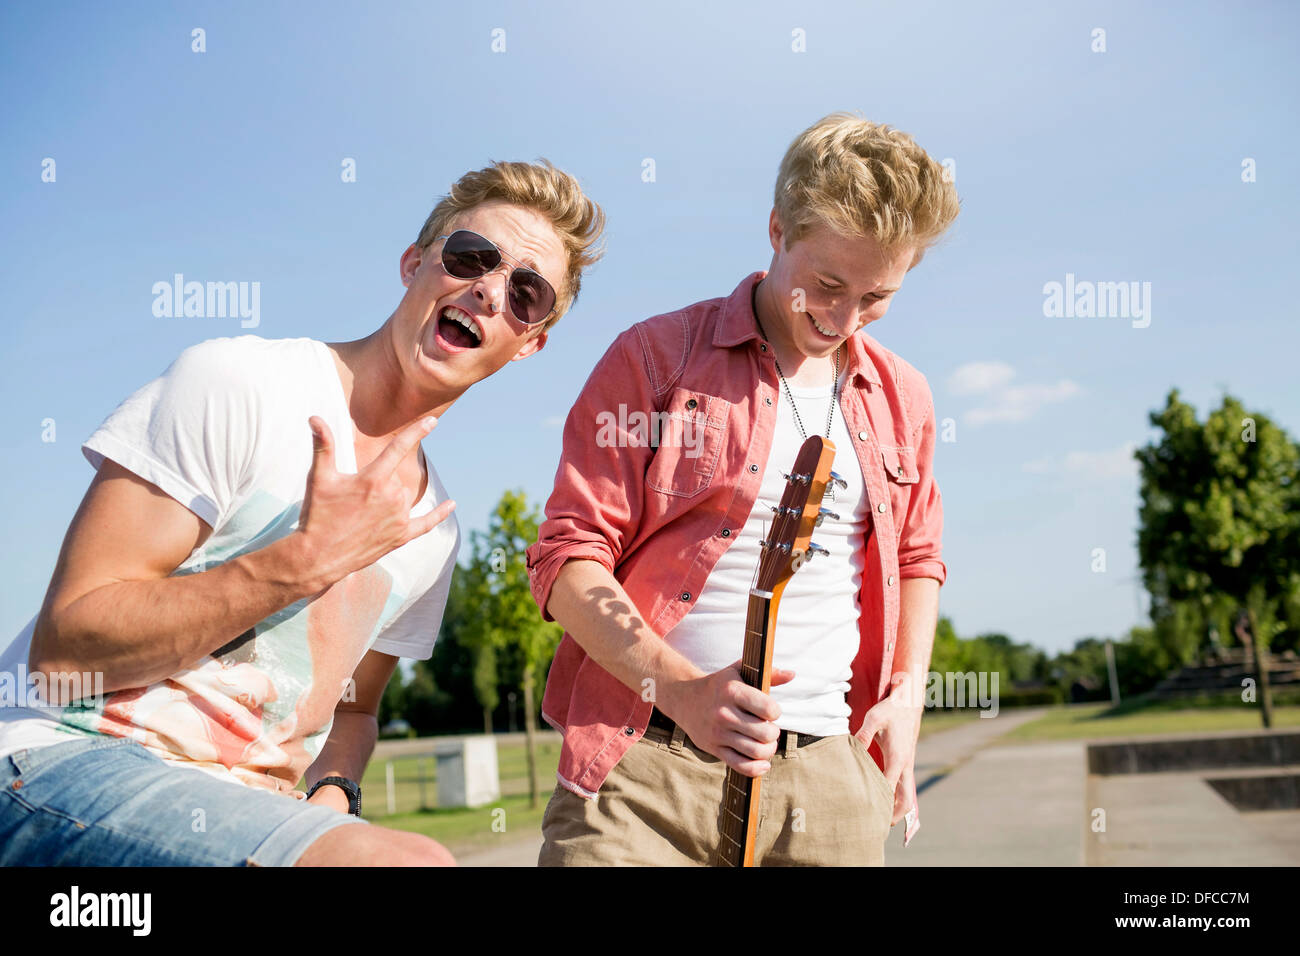 Germany, Young man is making rock' roll sigh, while friend is looking away Stock Photo